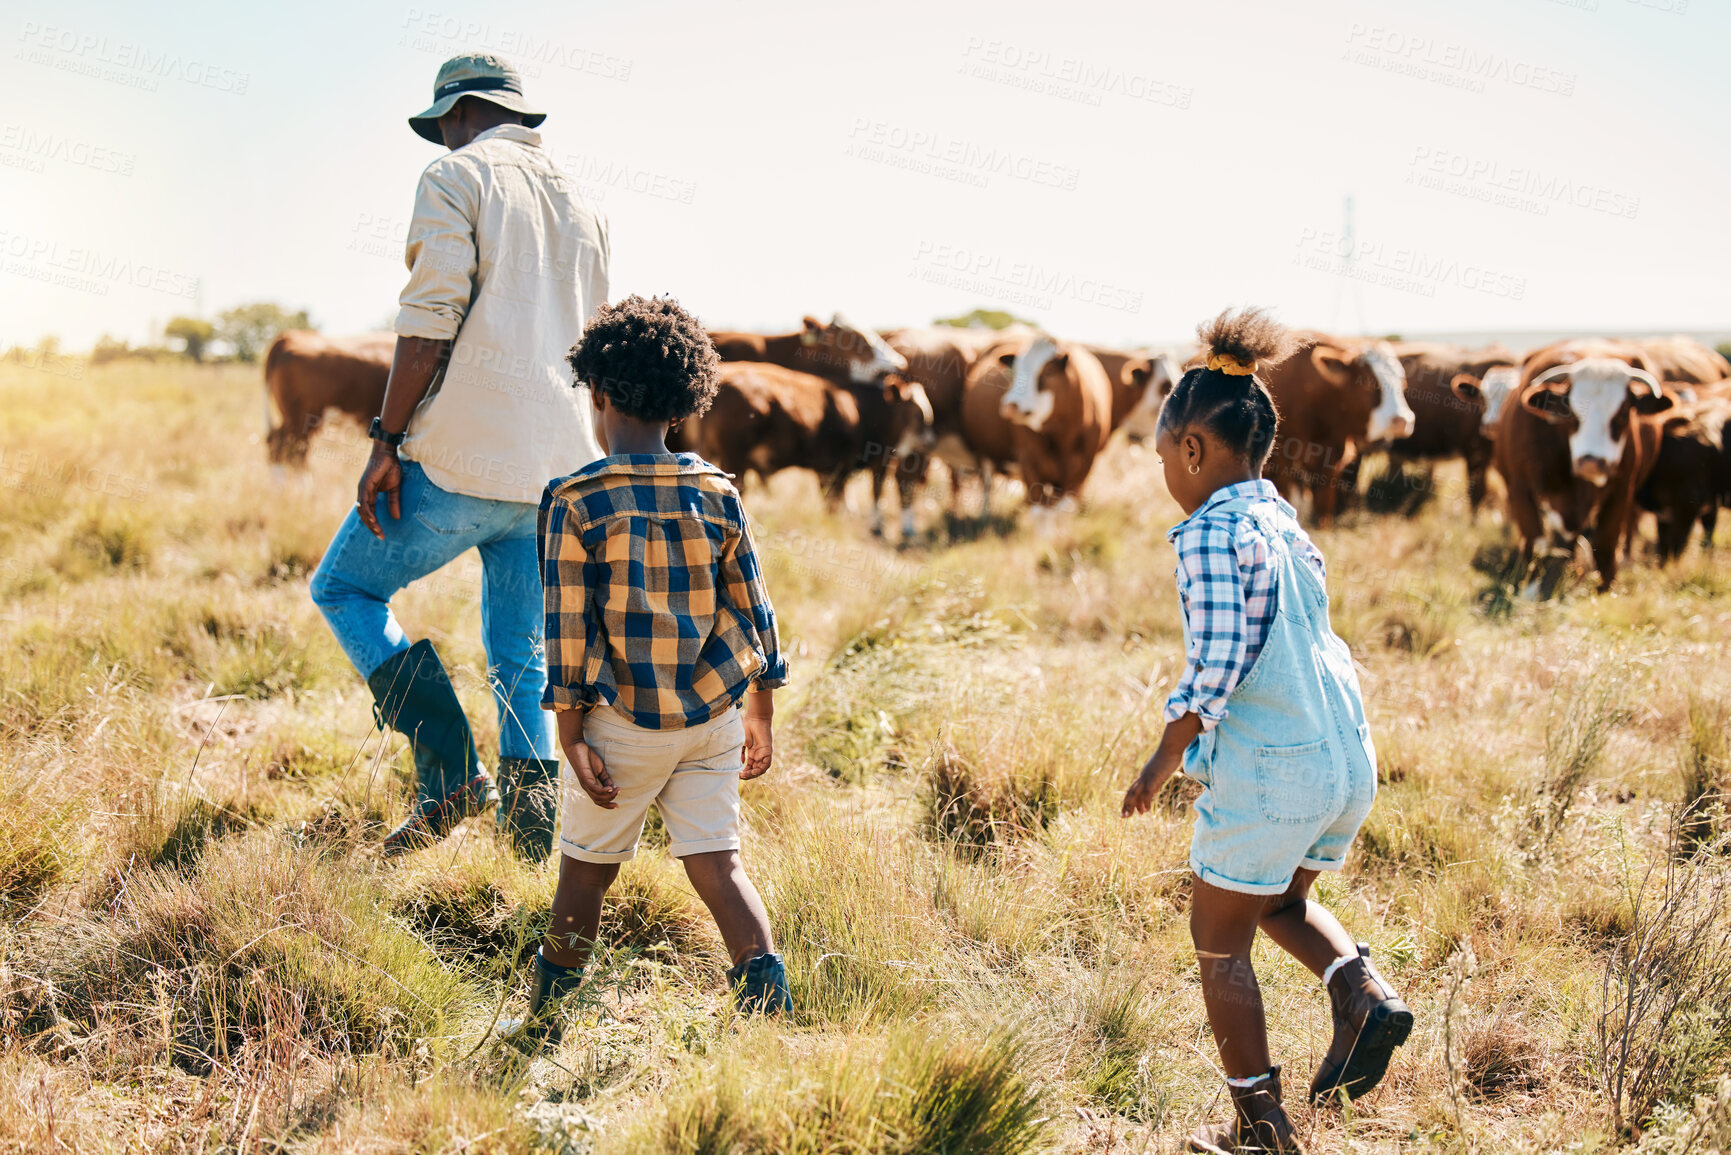 Buy stock photo Cows, kids or father walking on farm agriculture for livestock, sustainability or agro business in countryside. Children, black family or African farmer farming cattle herd or animals on grass field